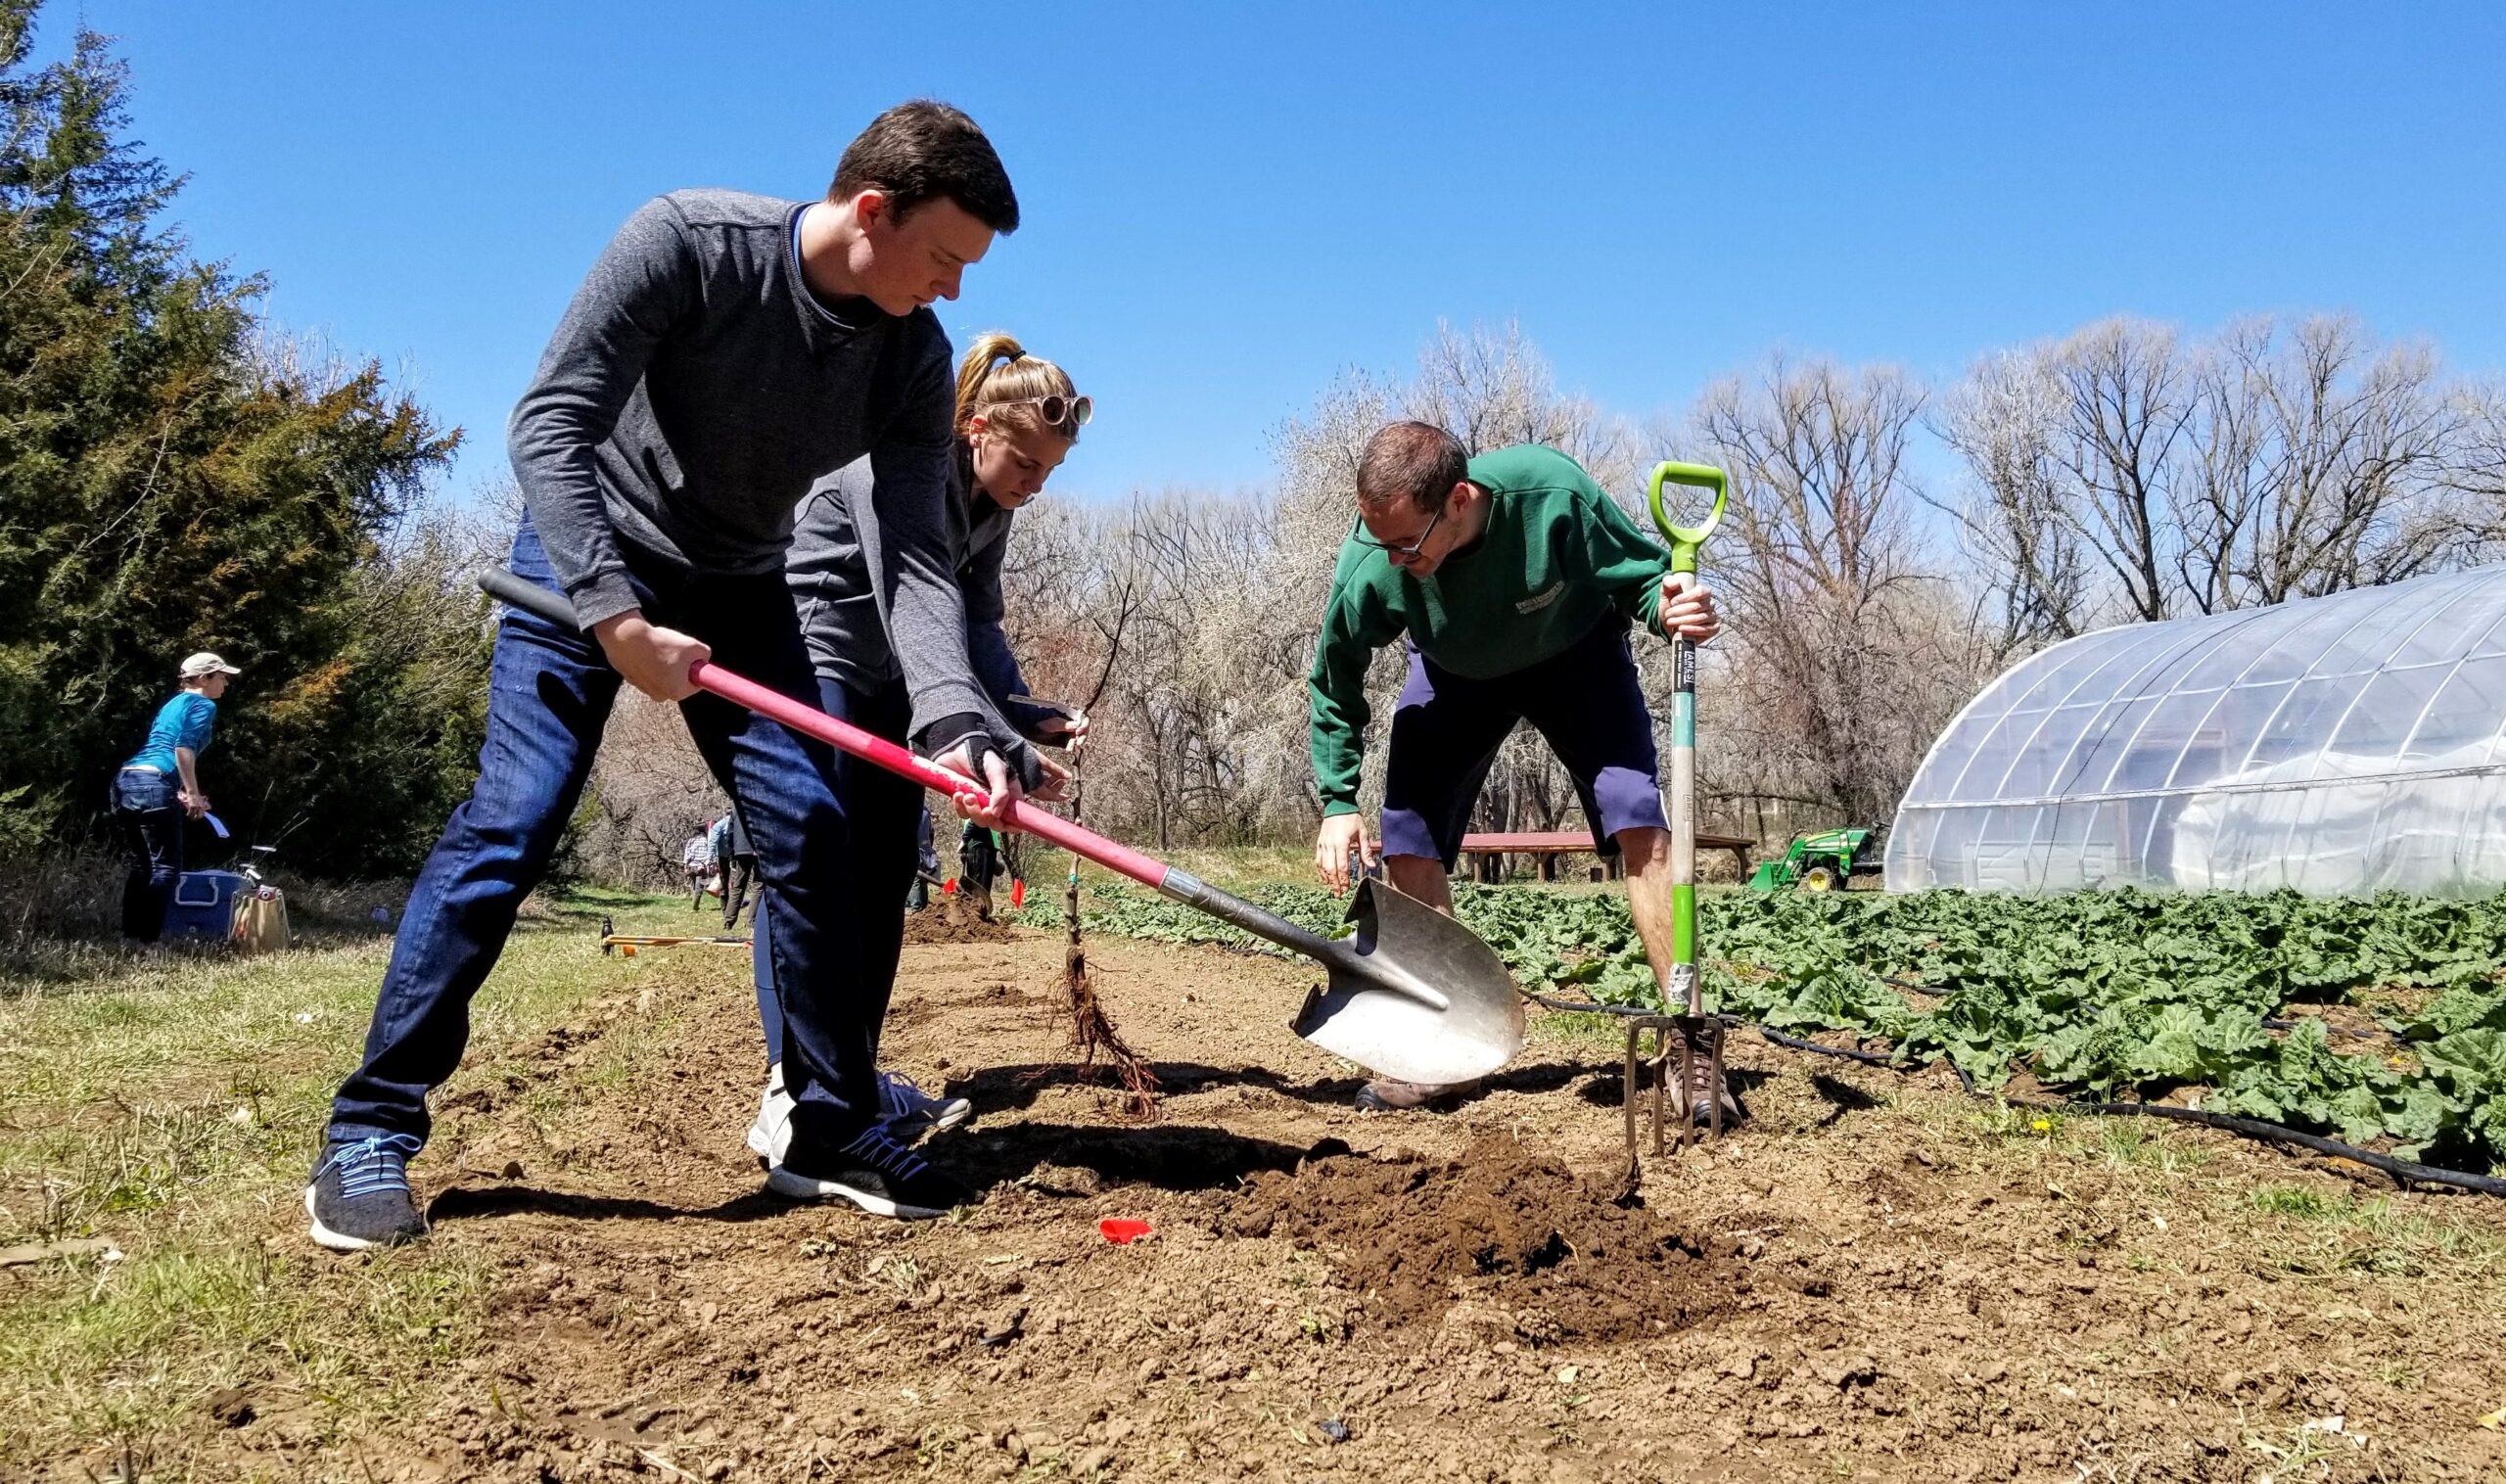 Residents around Longmont, Colorado help dig soil to plant new vegetation on Earth Day. Photo by: Matthew McGuire